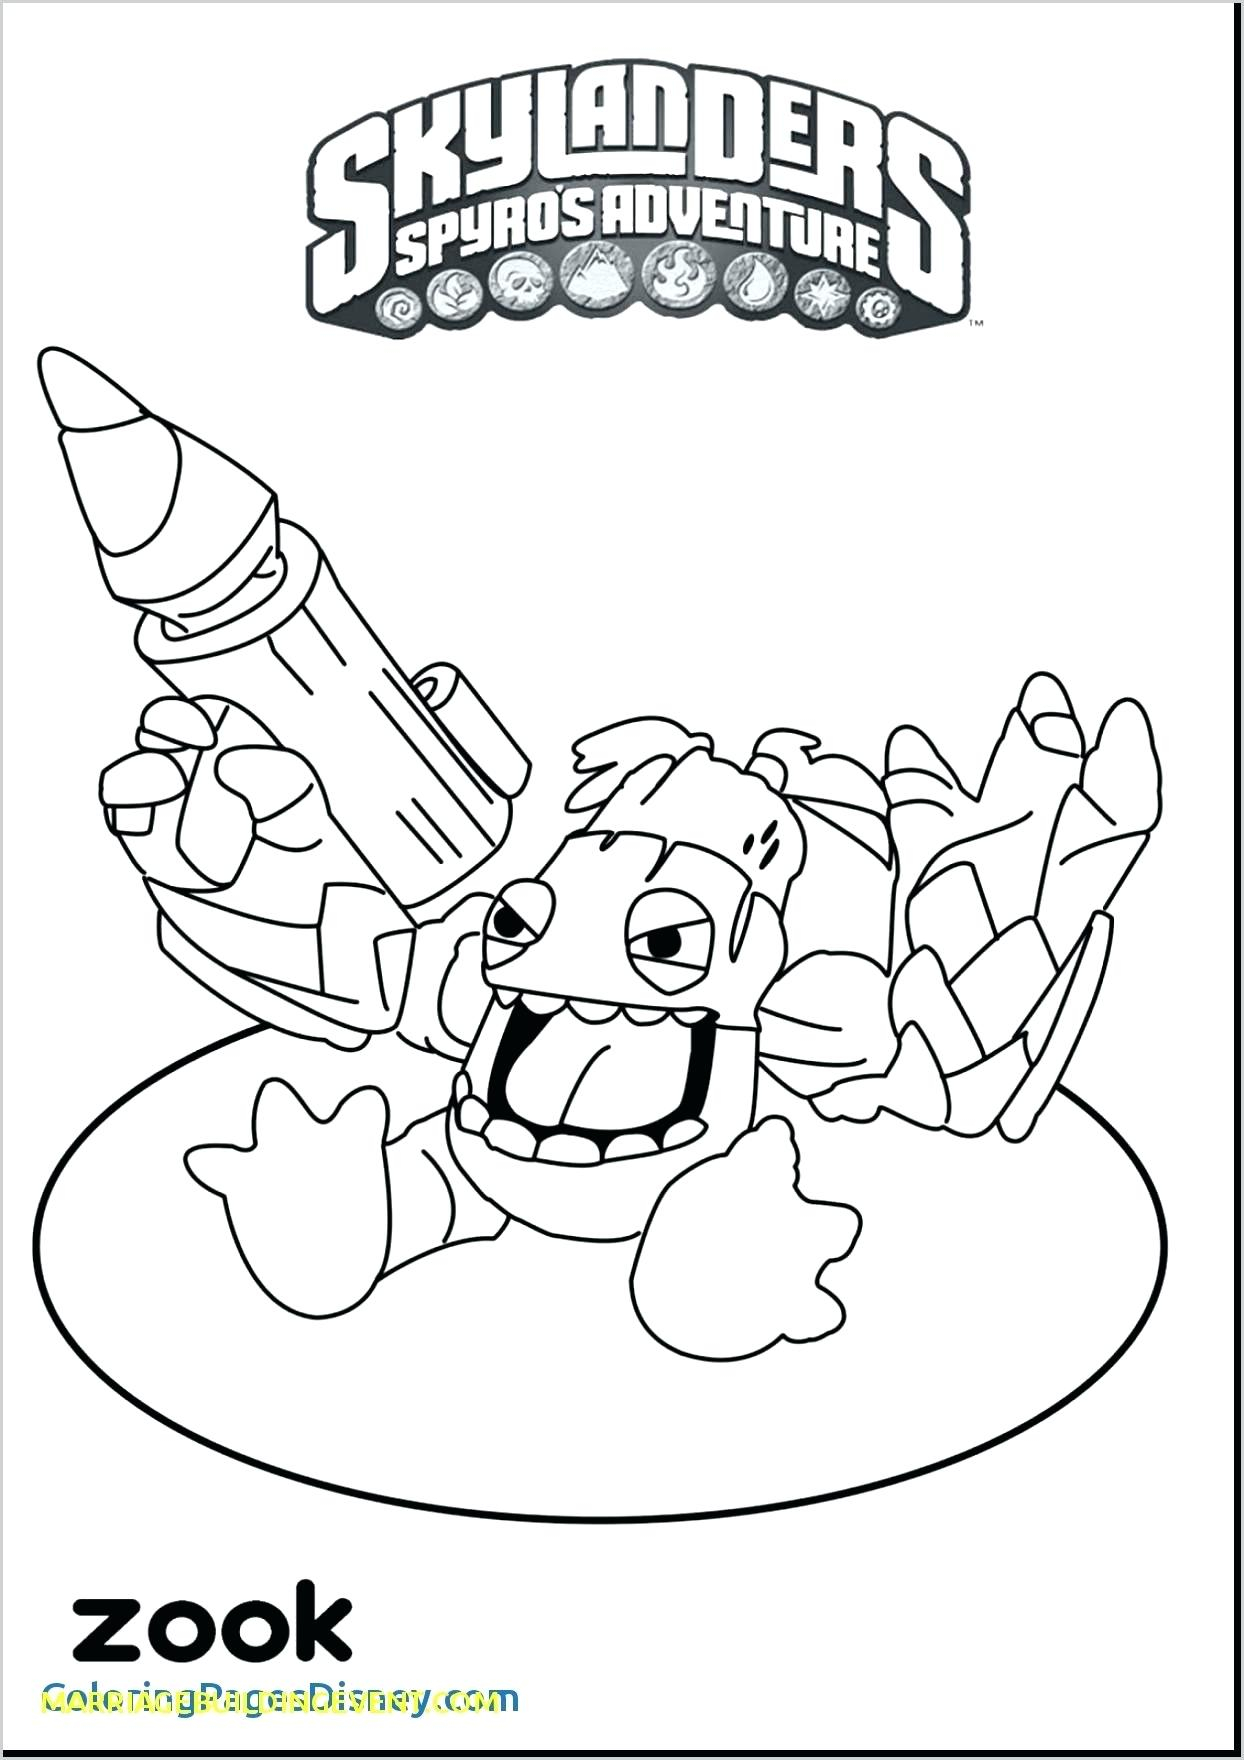 Printable Transformers Coloring Pages Transformers Free Coloring Pages Redhatsheetco